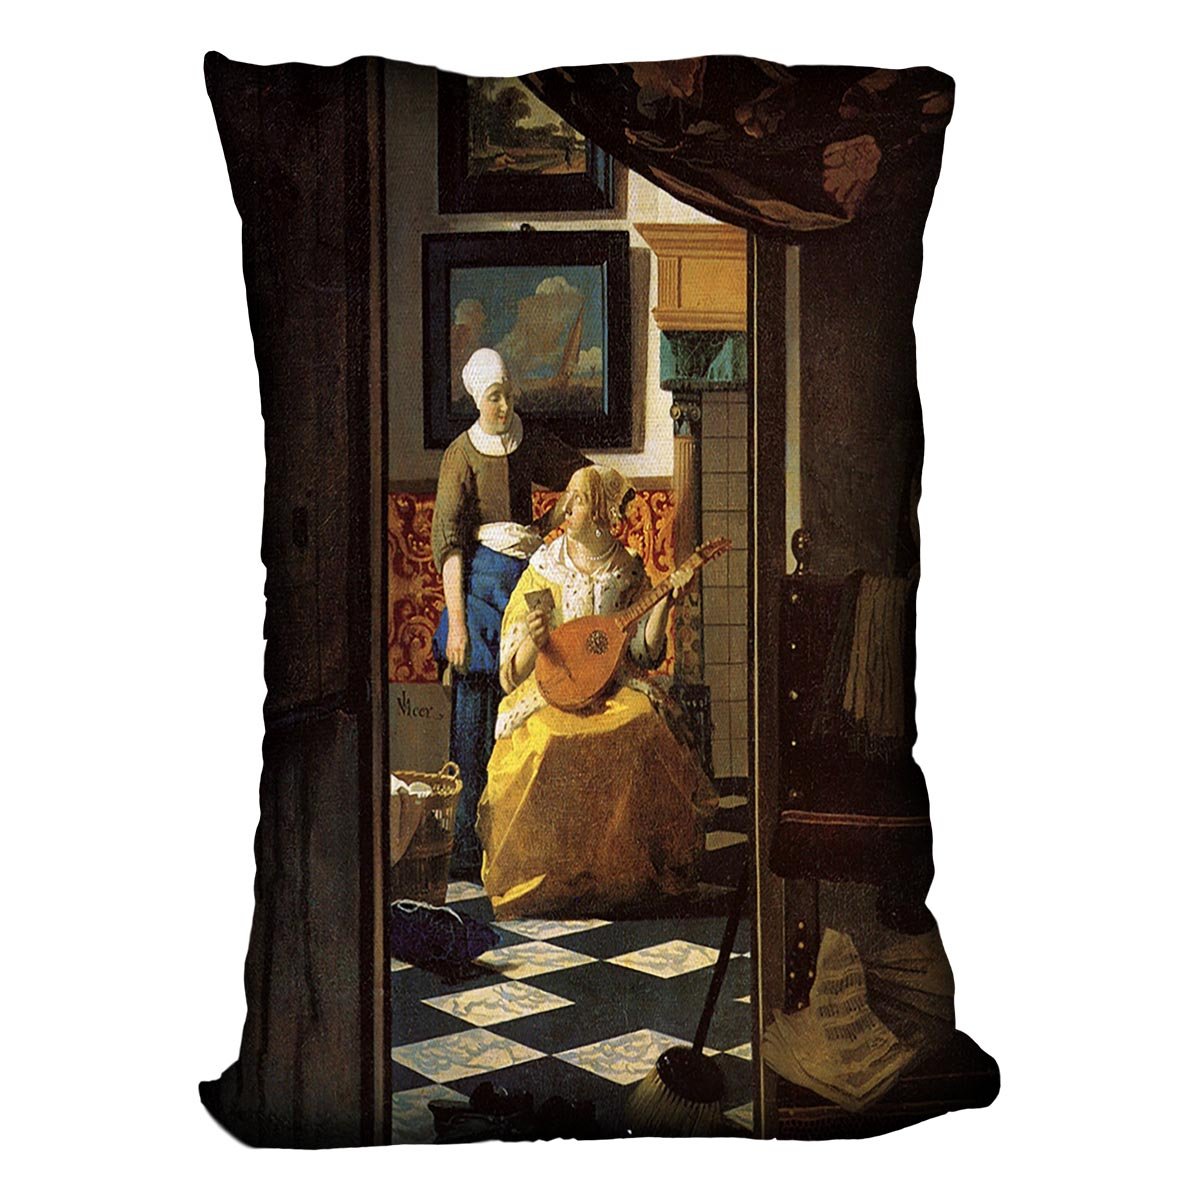 The love letter by Vermeer Cushion